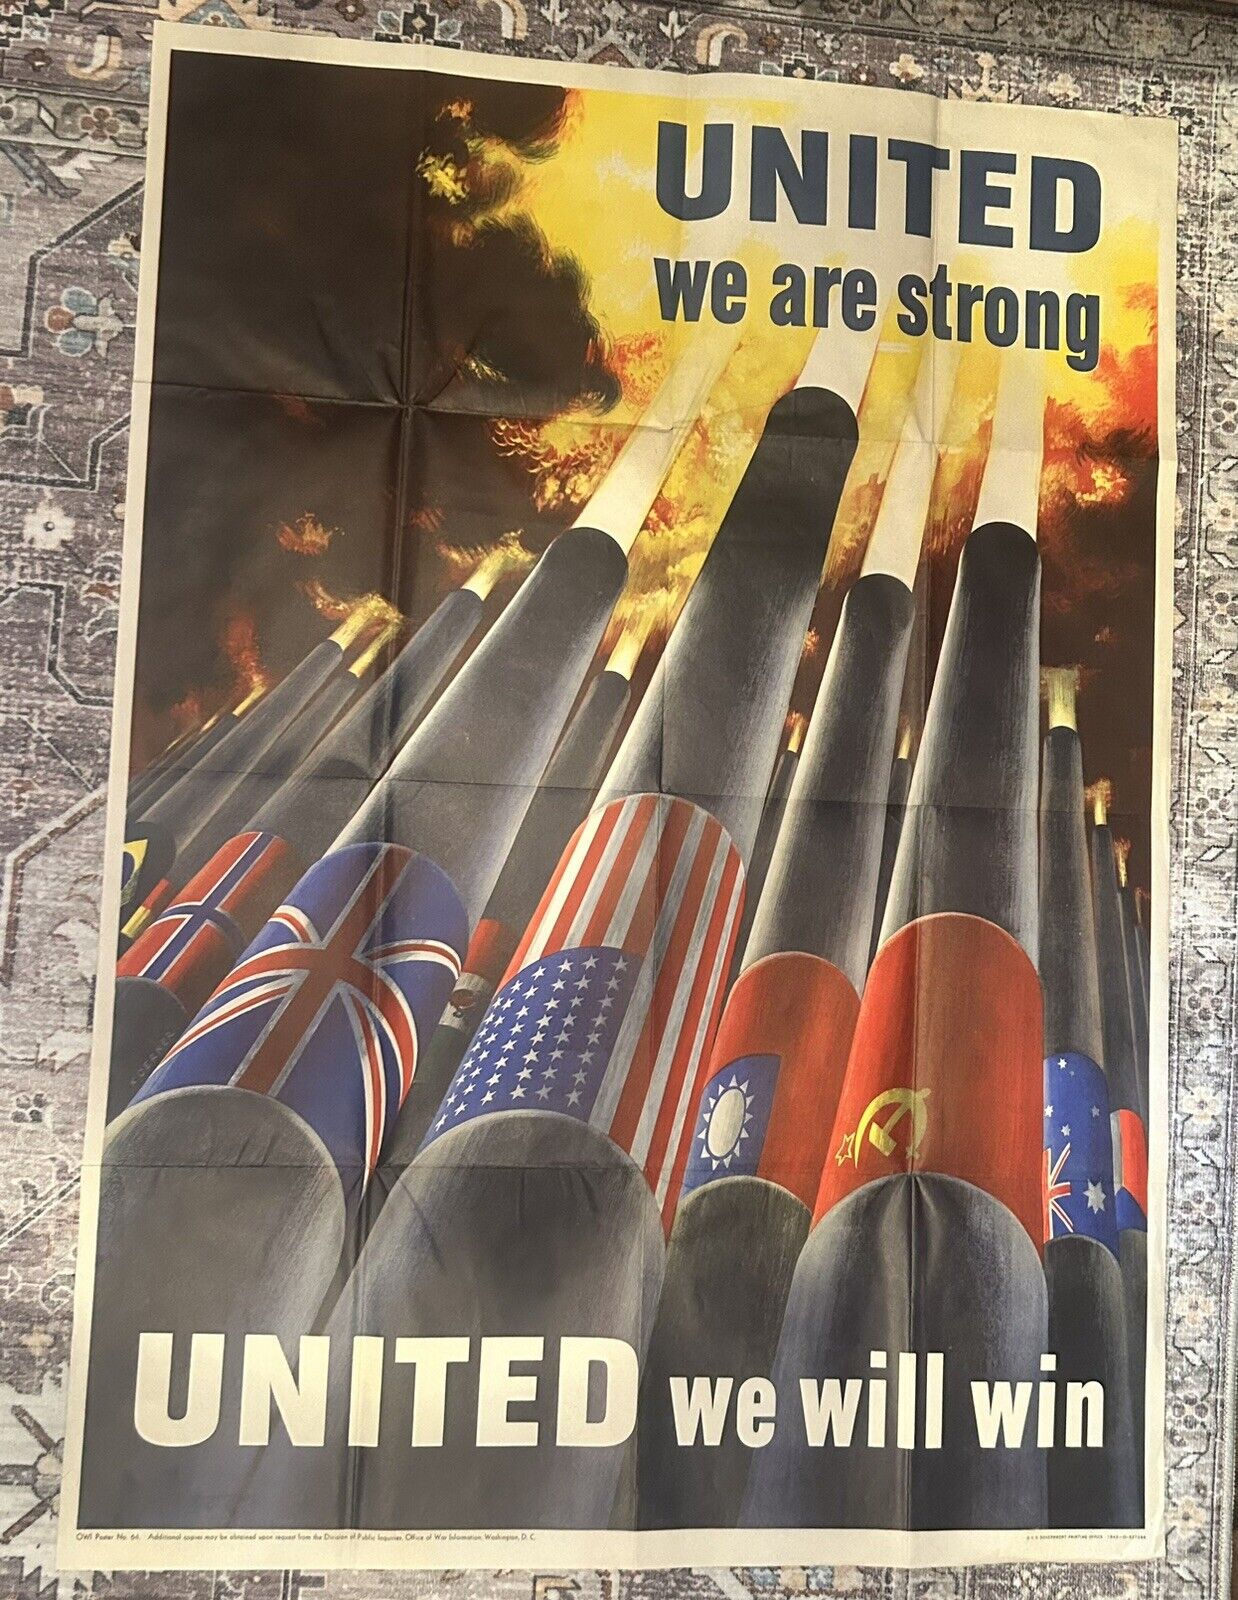 ww2 poster “United We Are Strong United We Will Win”